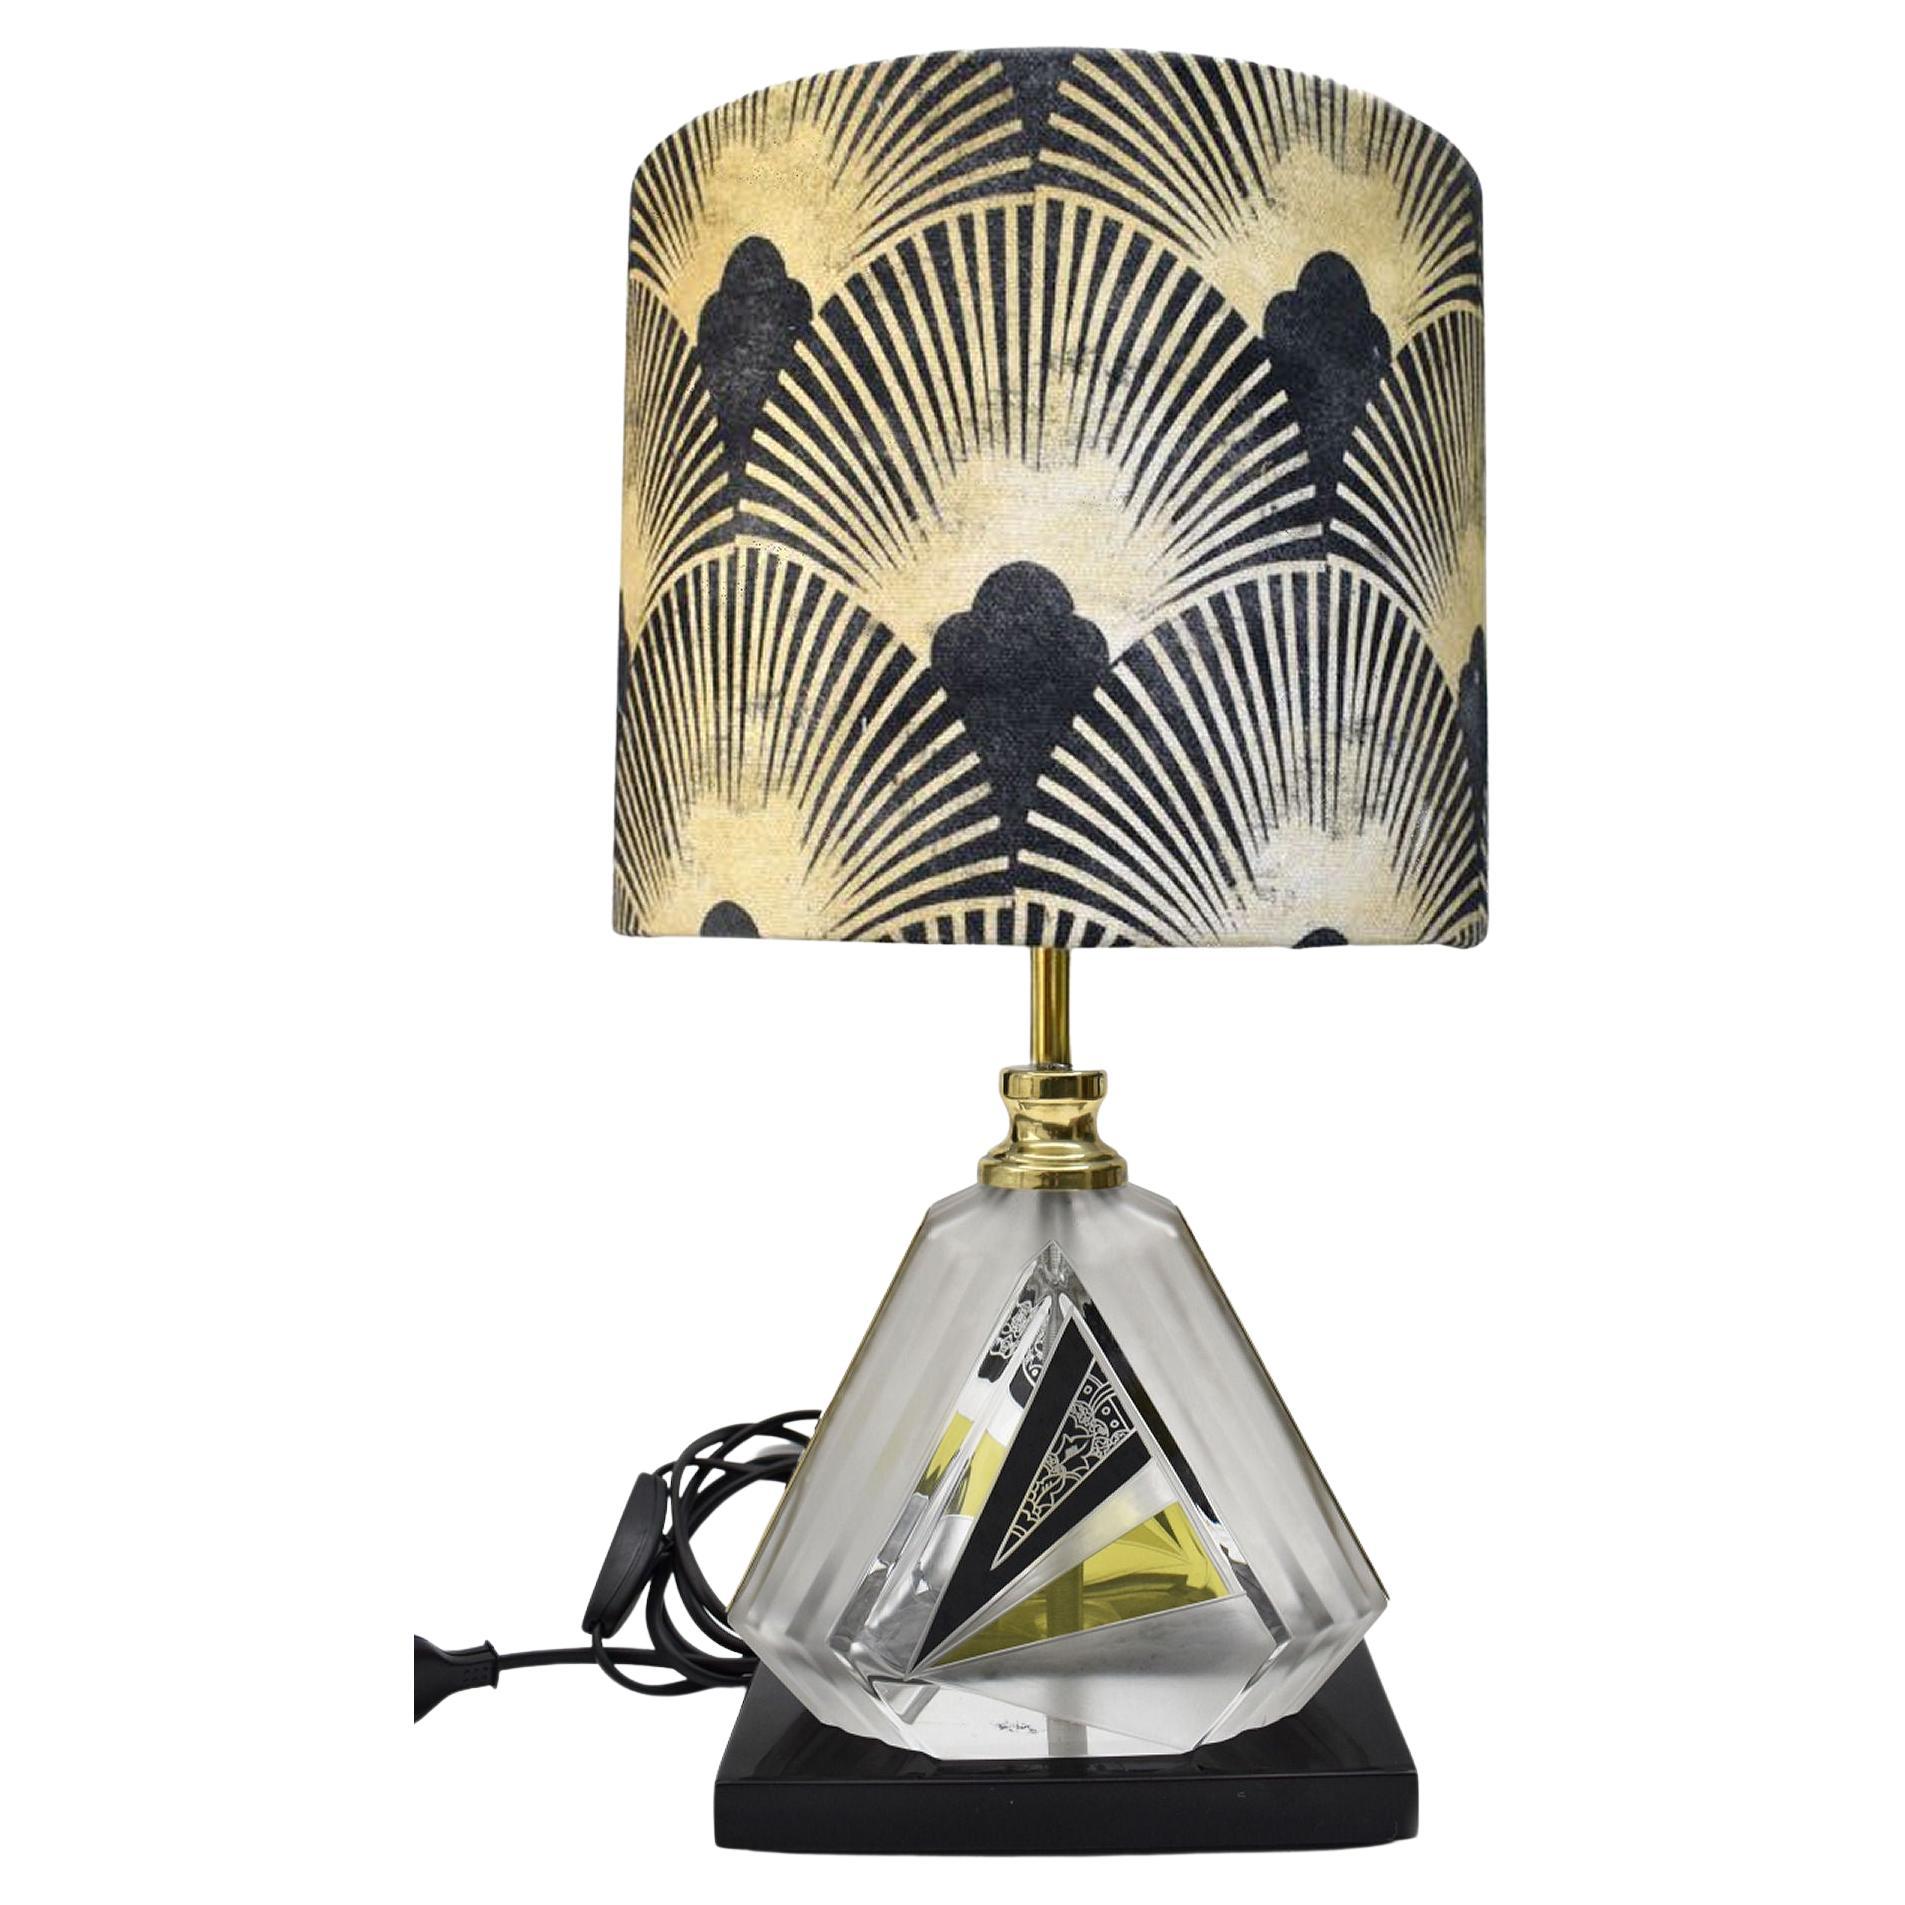 Art Deco Iconic Glass Table Lamp By Karl Palda, c1930 For Sale